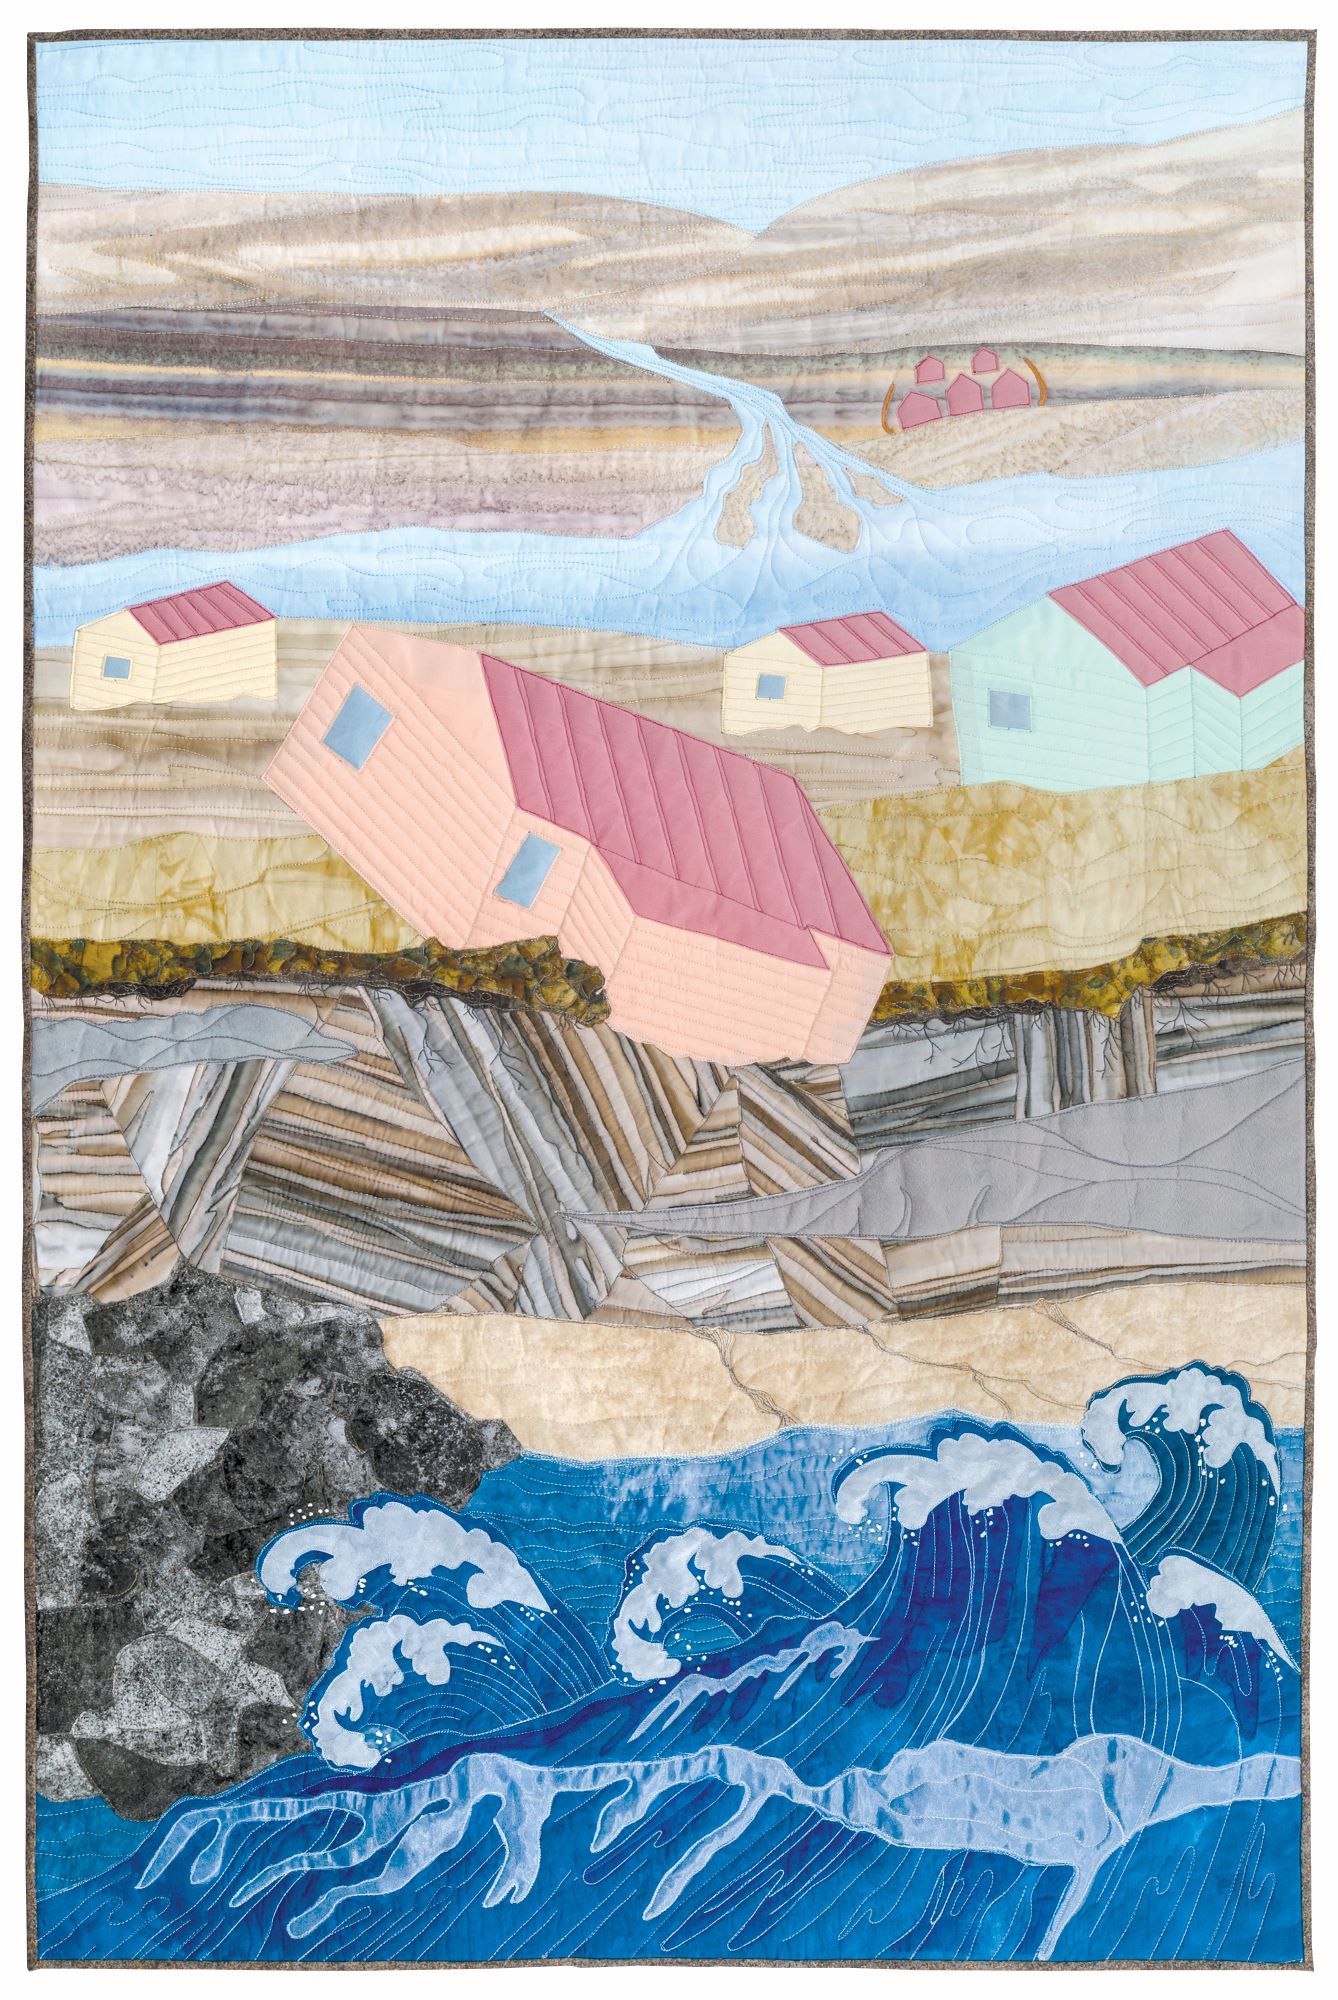 quilt depicting a landscape with pink houses and water